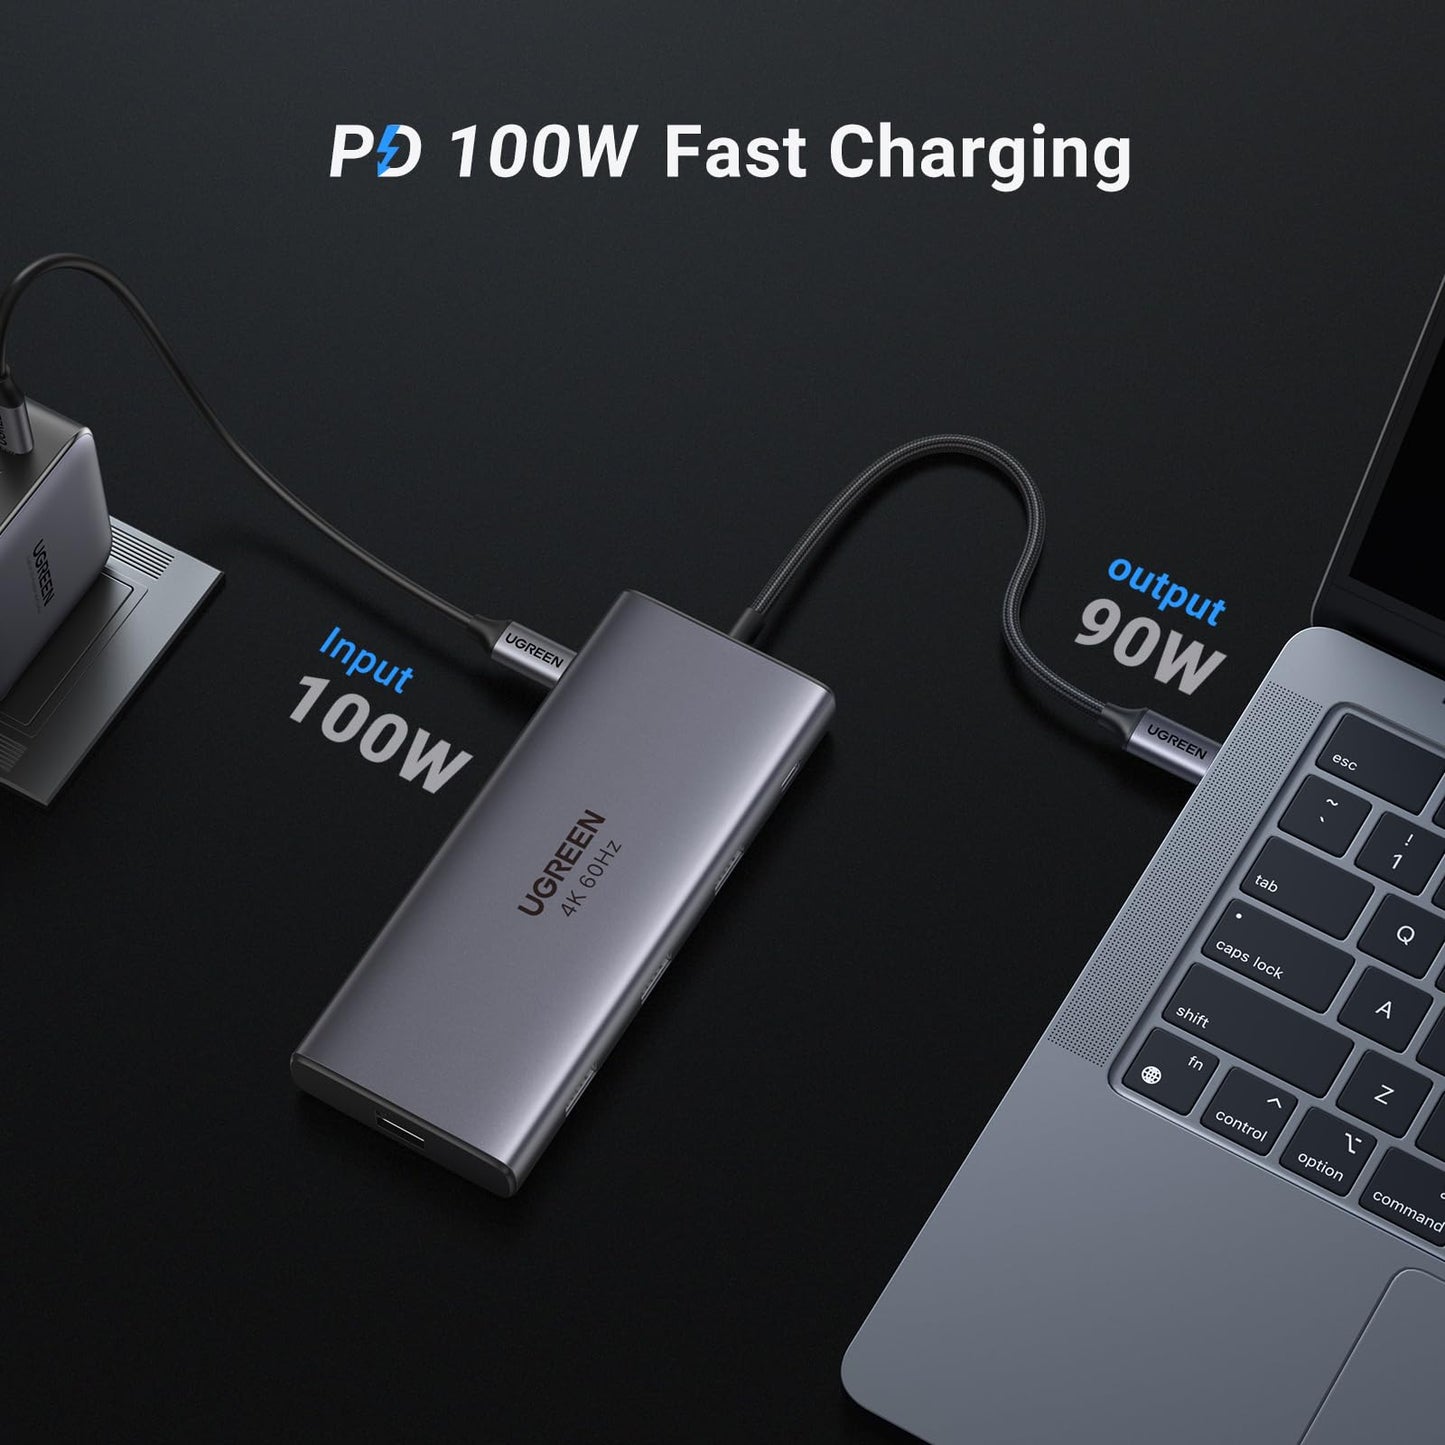 UGREEN Revodok Pro 109 USB C Hub 9 in 1 10Gbps USB C 3.2 & USBA 3.2 4K HDMI, 100W Power Delivery, SD/TF Card Reader Gigabit Ethernet for MacBook Pro/Air,iPhone 15 Pro/Pro Max, Thinkpad and More.